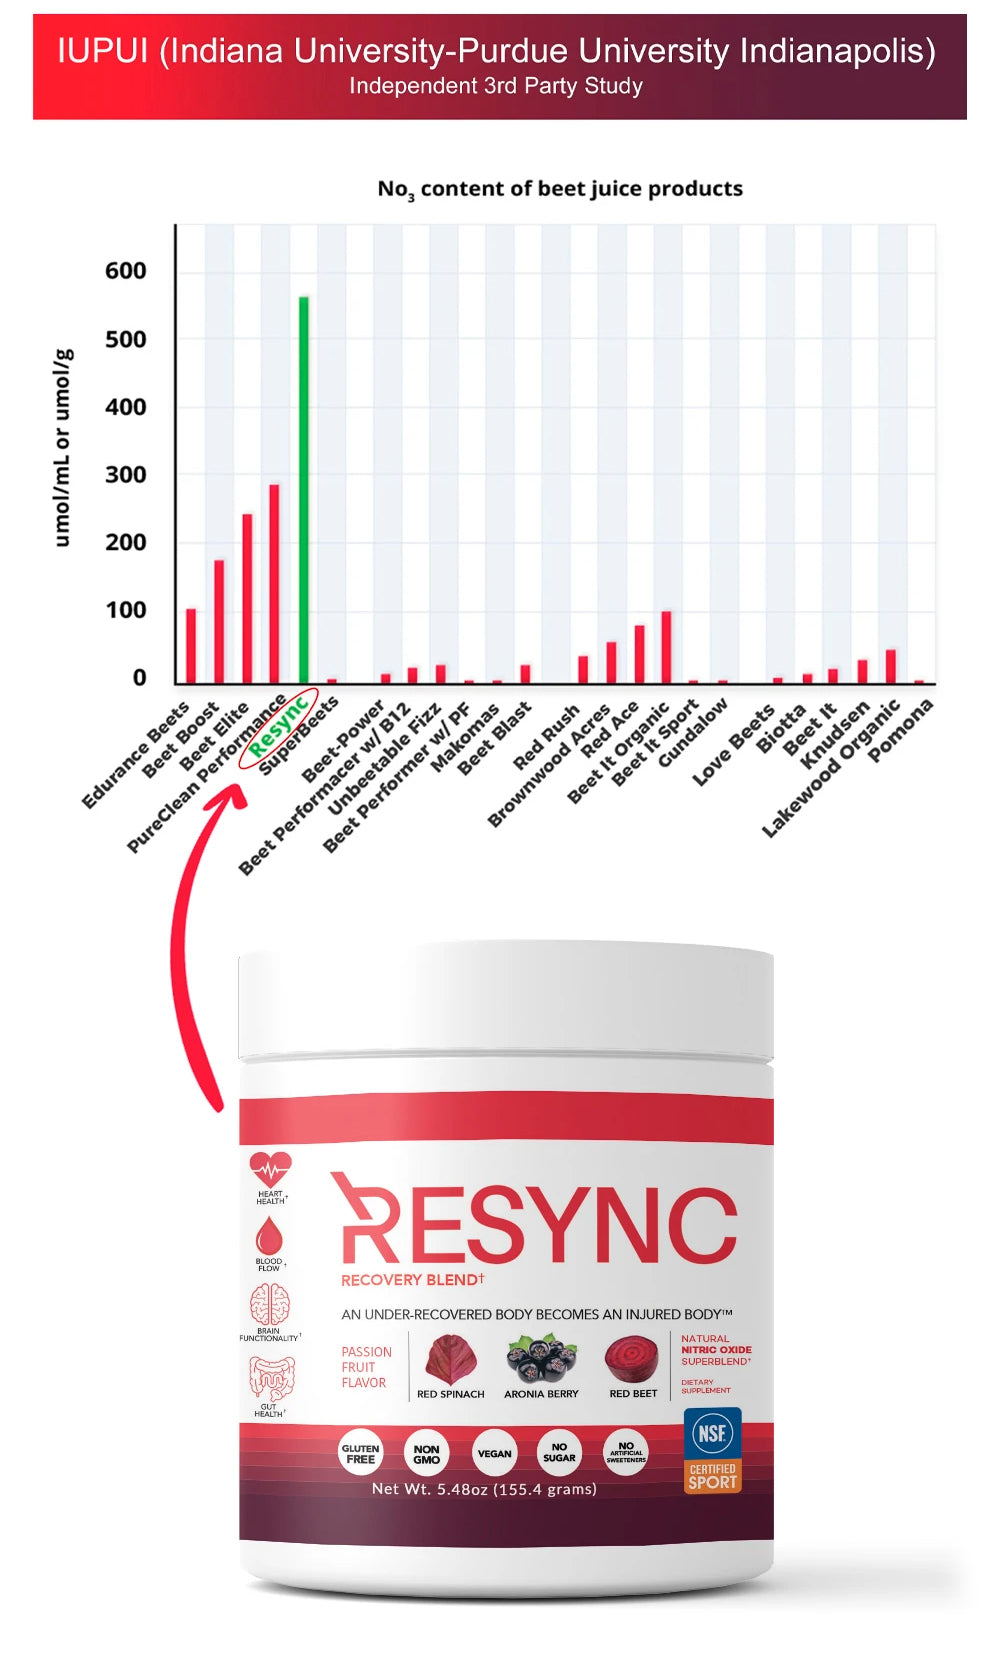 Resync Recovery vs 24 other beet related products in IUPUI independent 3rd party study